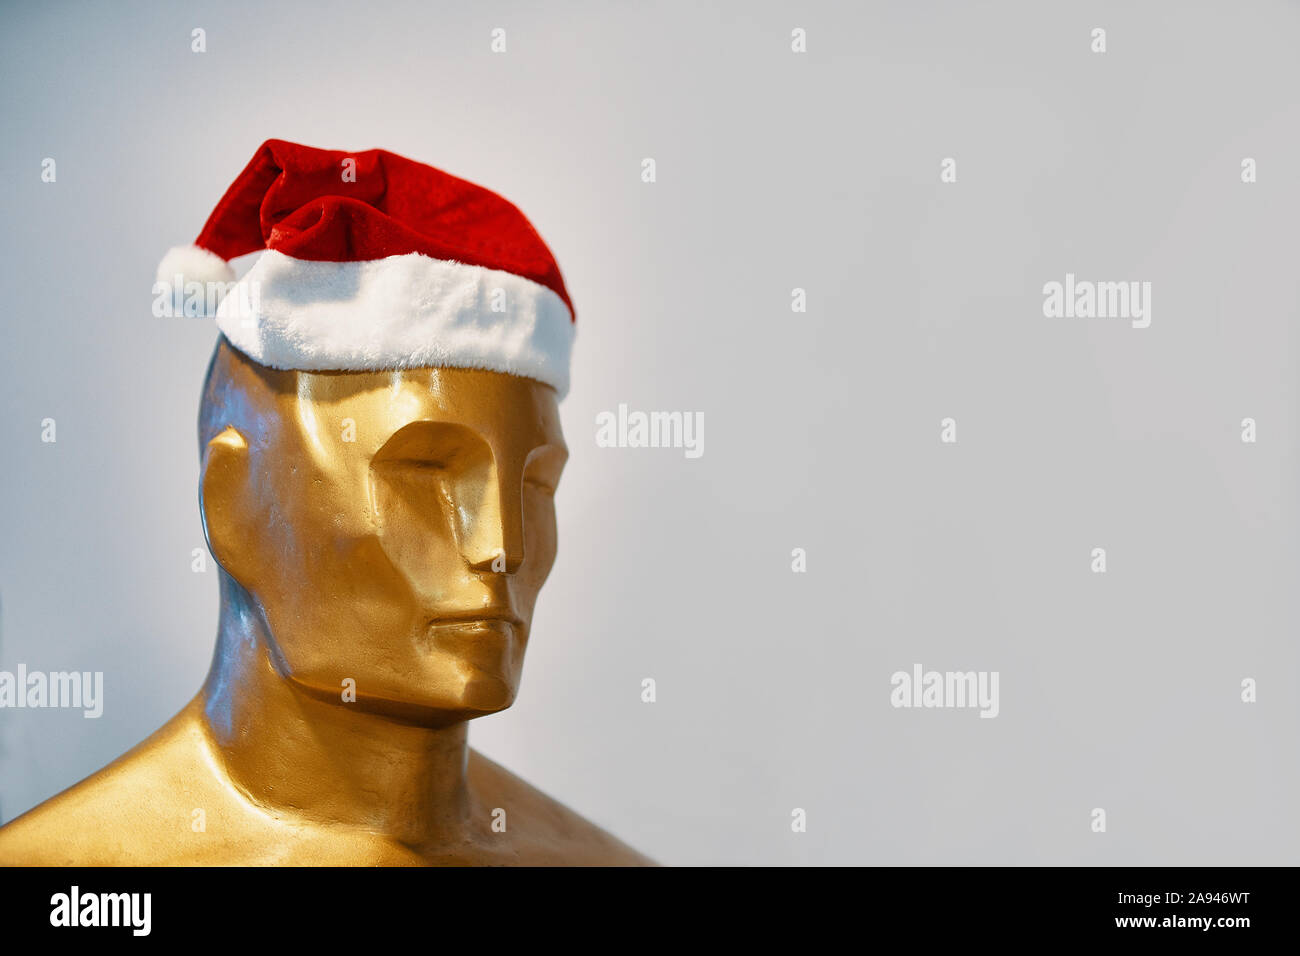 Bishkek, Kyrgyzstan - December 21, 2018: The man in the Christmas hat. A Golden statue of Oscar stands in a Christmas hat. Stock Photo